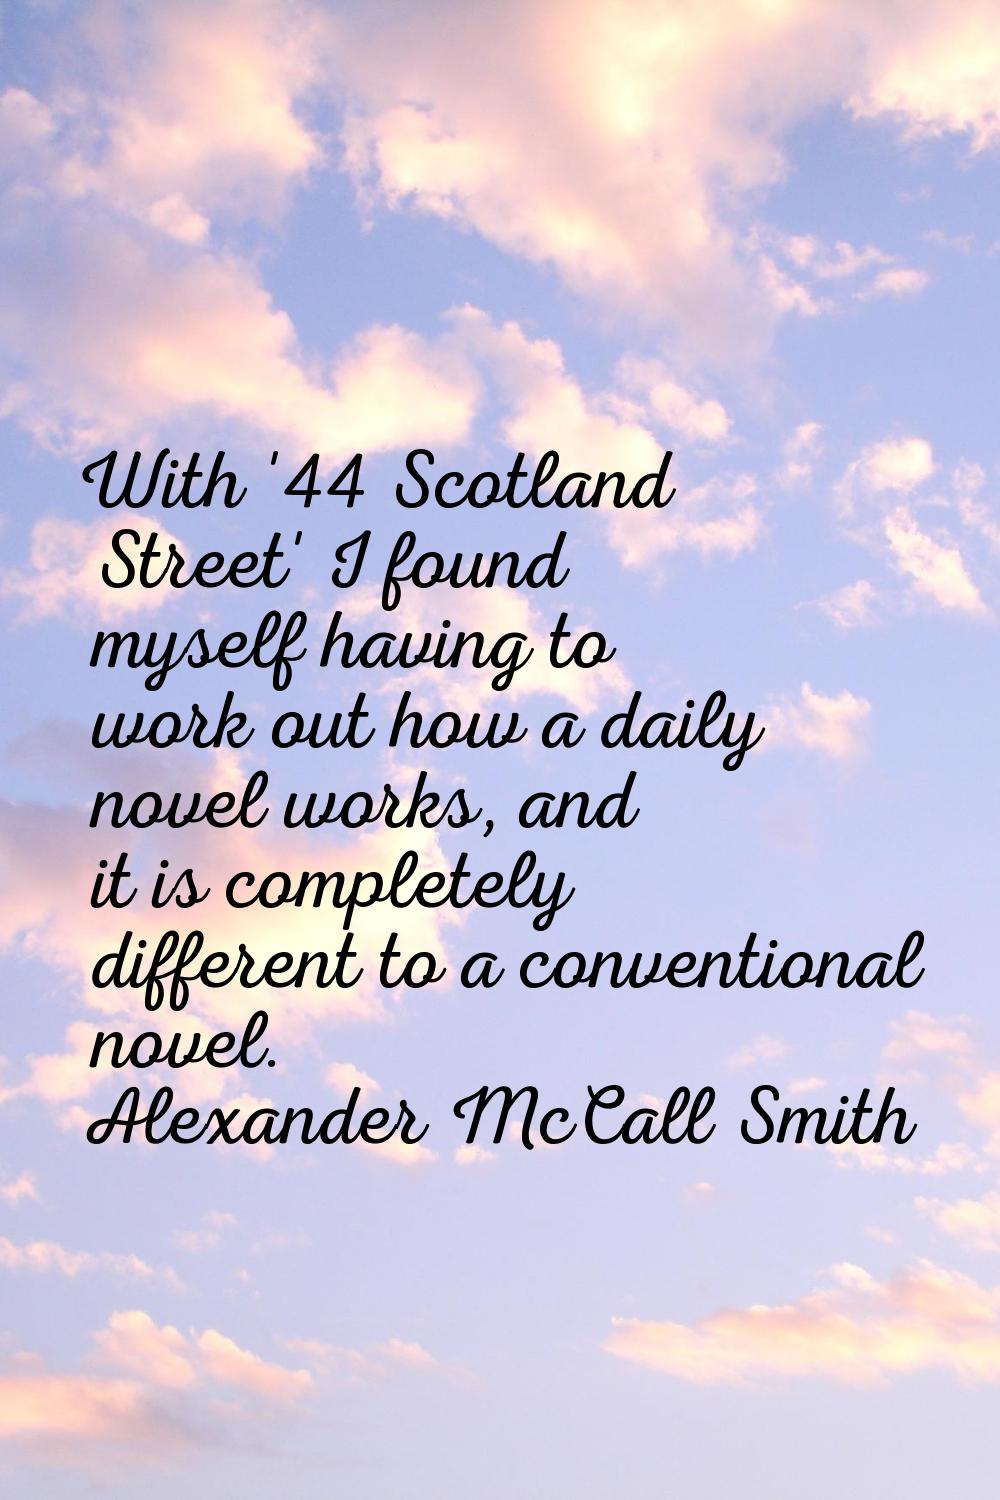 With '44 Scotland Street' I found myself having to work out how a daily novel works, and it is comp